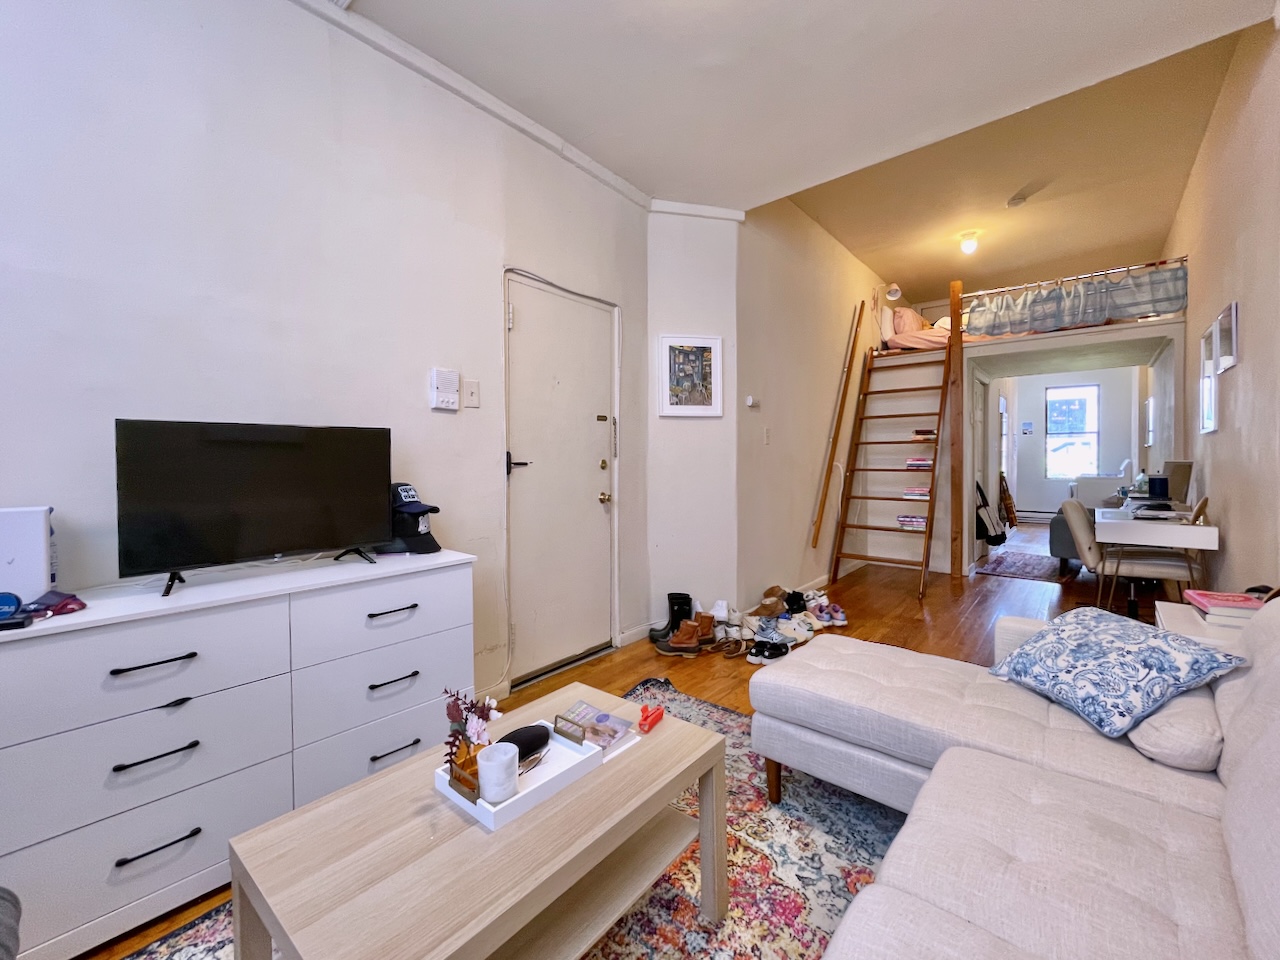 Spacious studio with loft style space. Located in a great Midtown Hoboken location, allowing for easy transportation for commuters who can also enjoy close proximity to great restaurants, shopping, and parks. Available July 1st! 